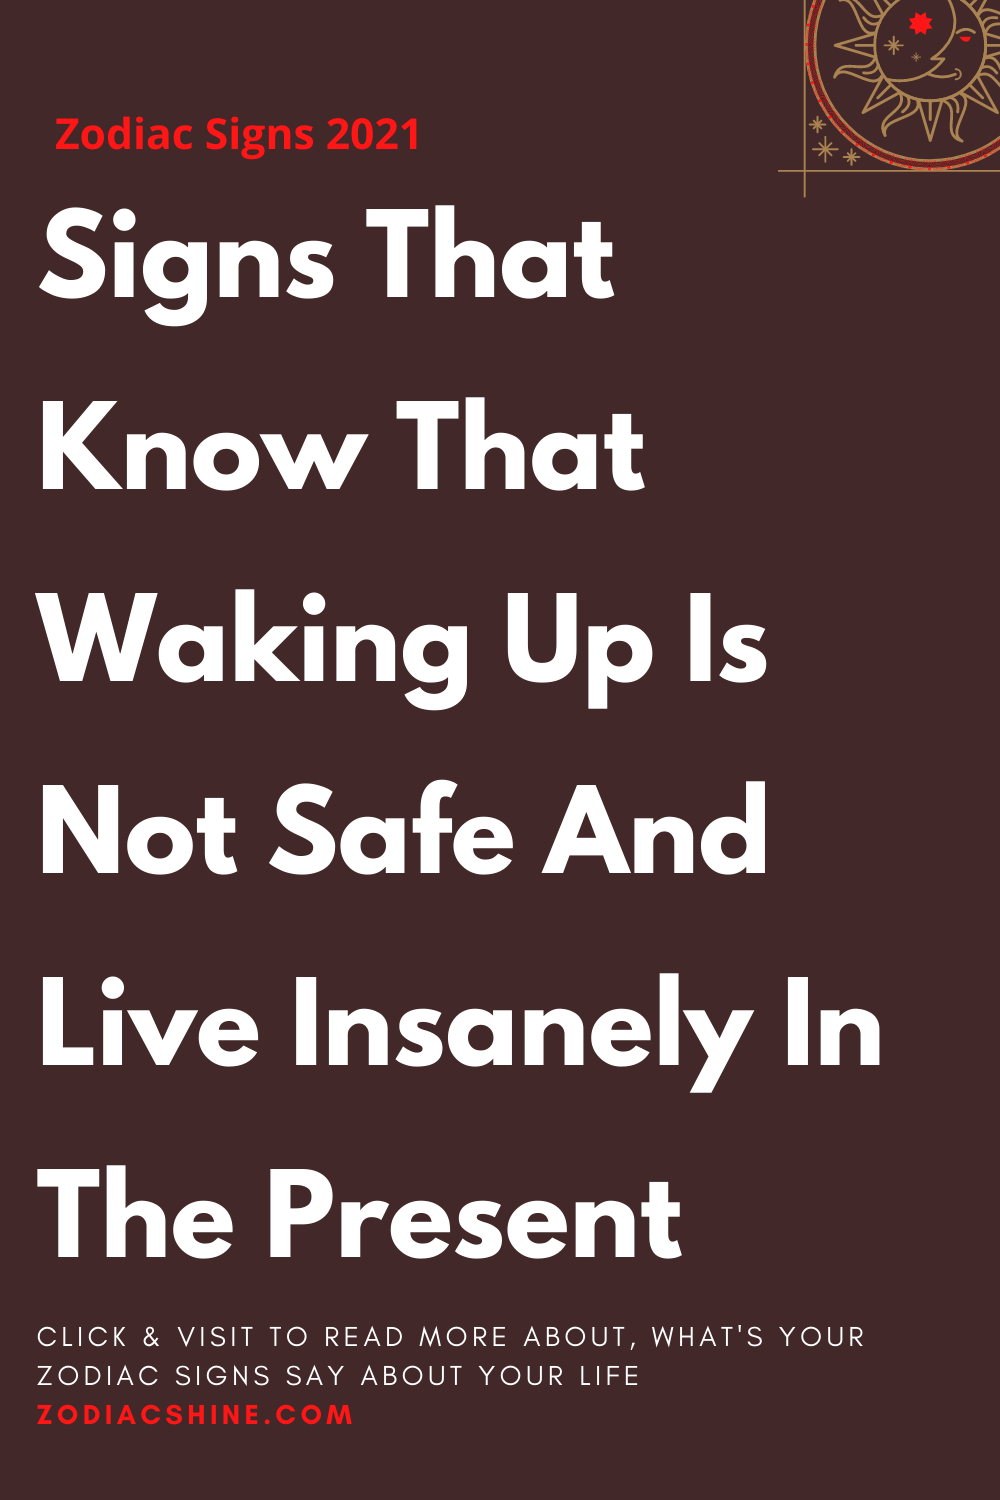 Signs That Know That Waking Up Is Not Safe And Live Insanely In The Present